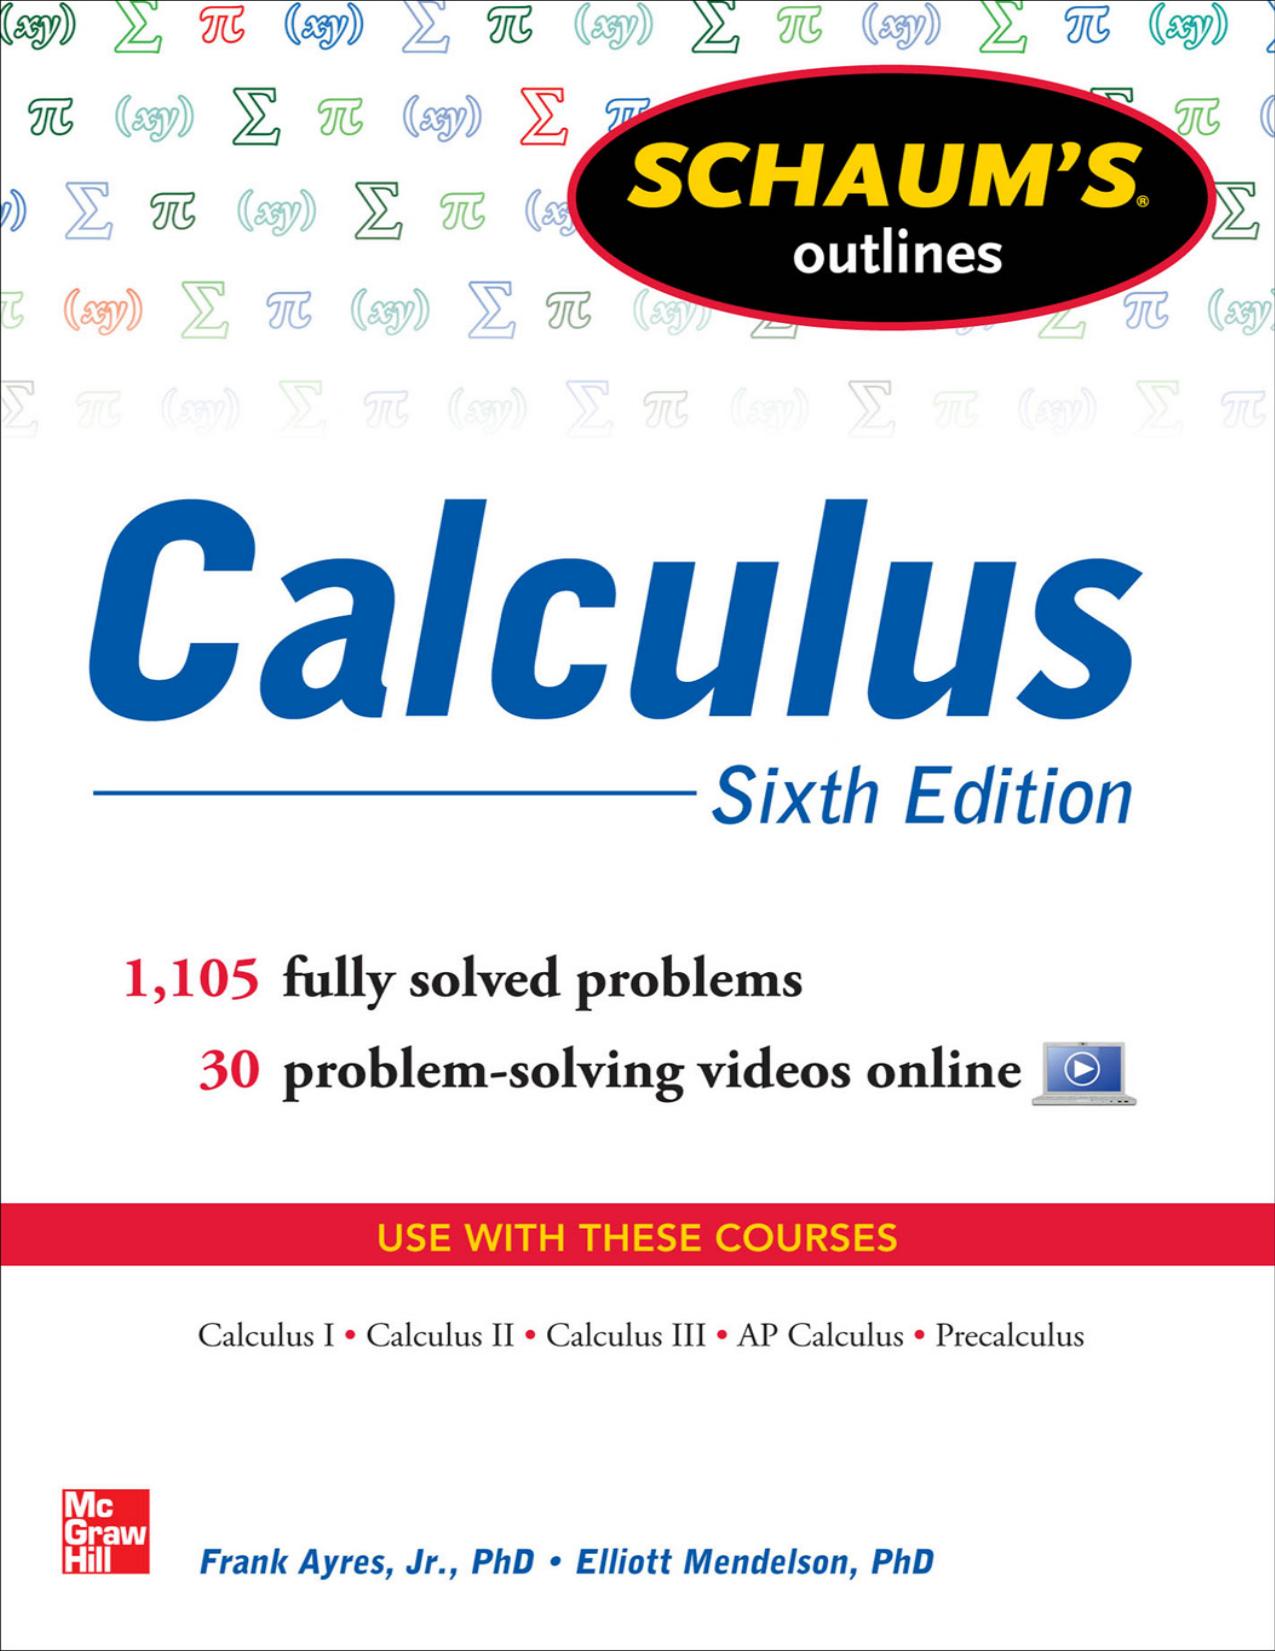 Schaum s Outline of Calculus: 1,105 Solved Problems + 30 Videos (Schaum's Outlines) 6th Edition by Frank Ayres